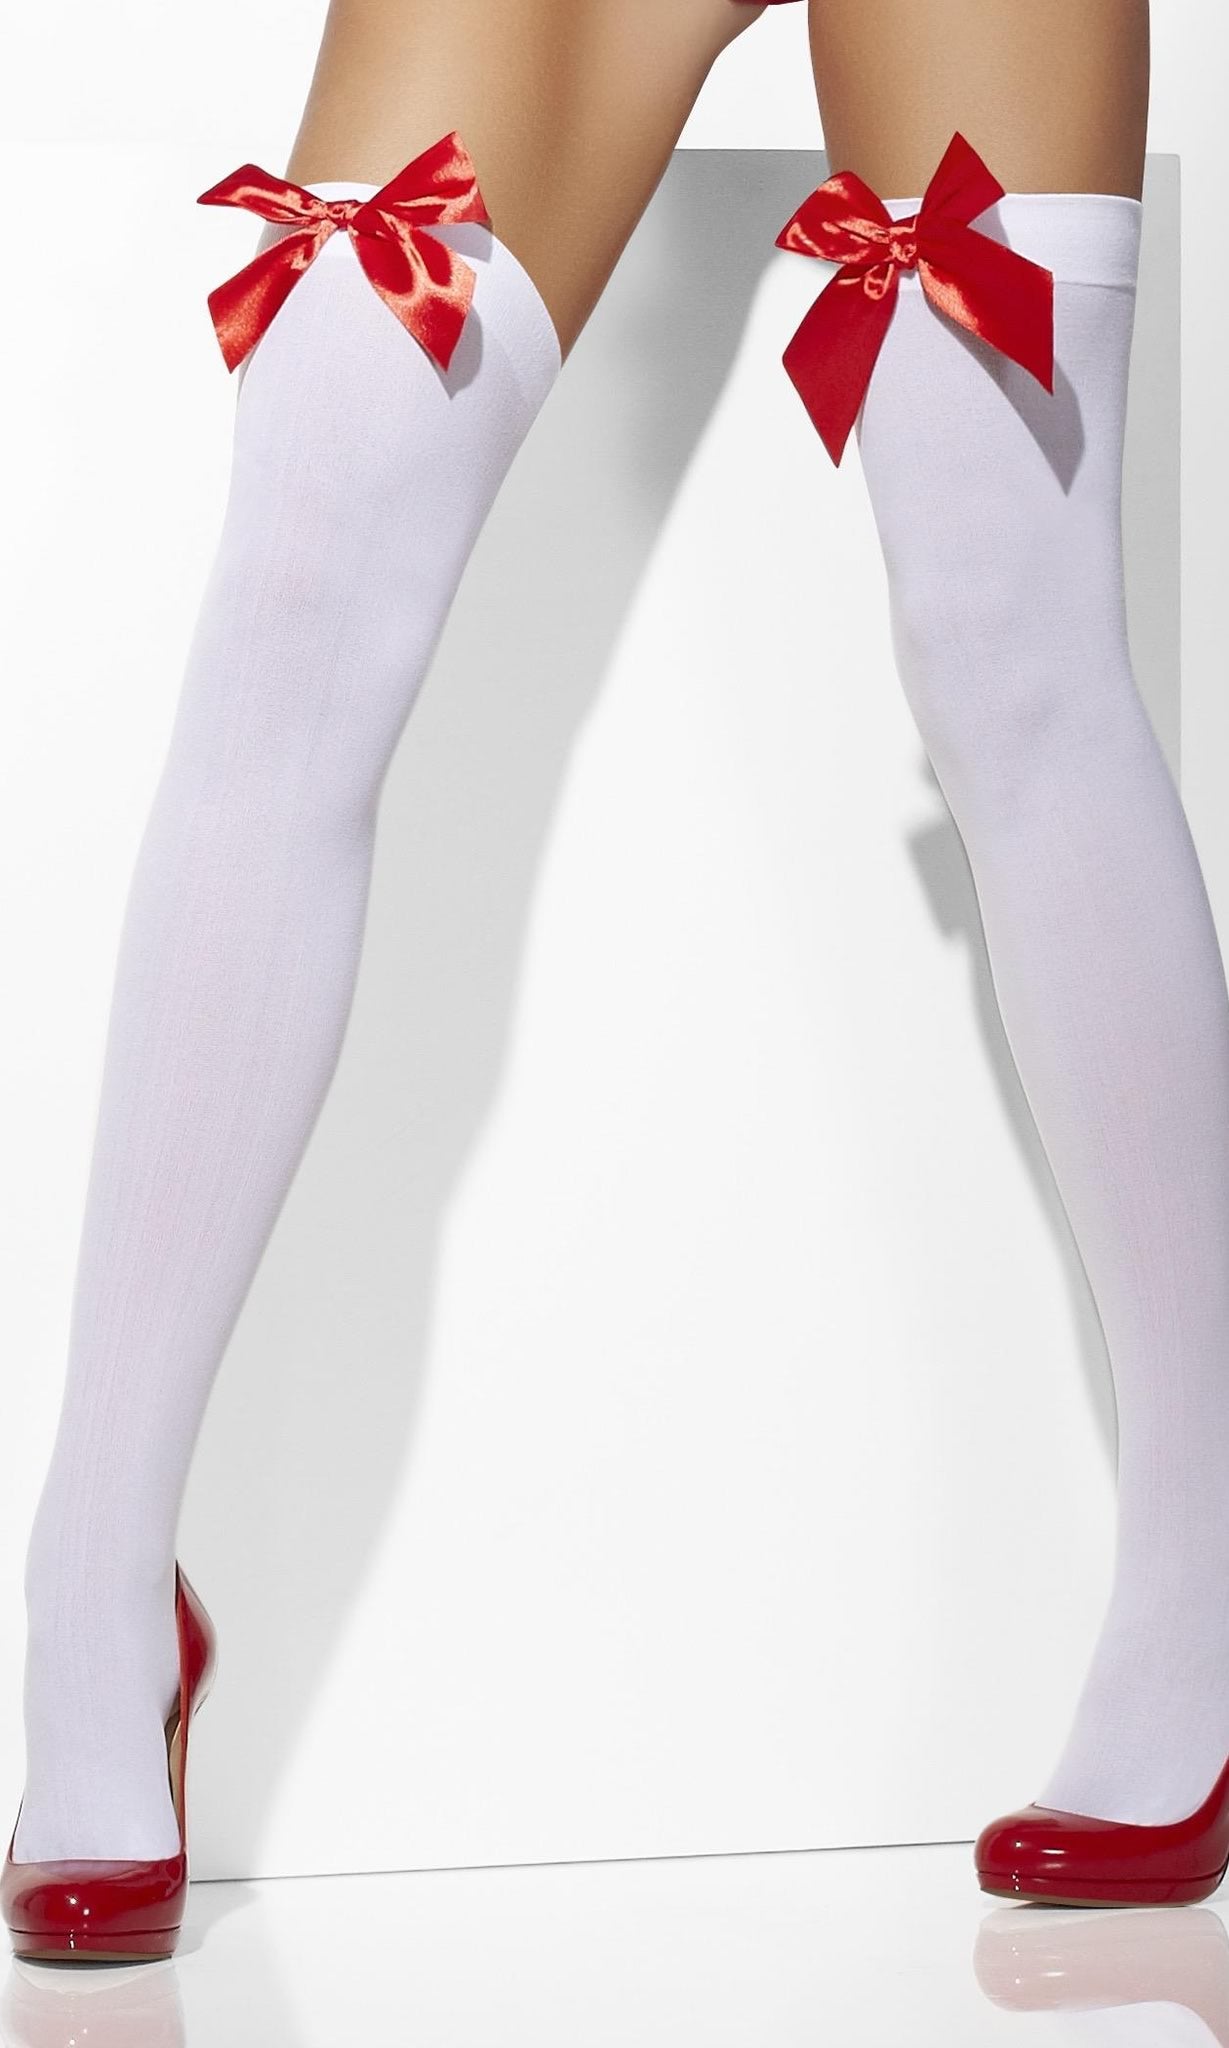 Stockings with Satin Bow White-Red